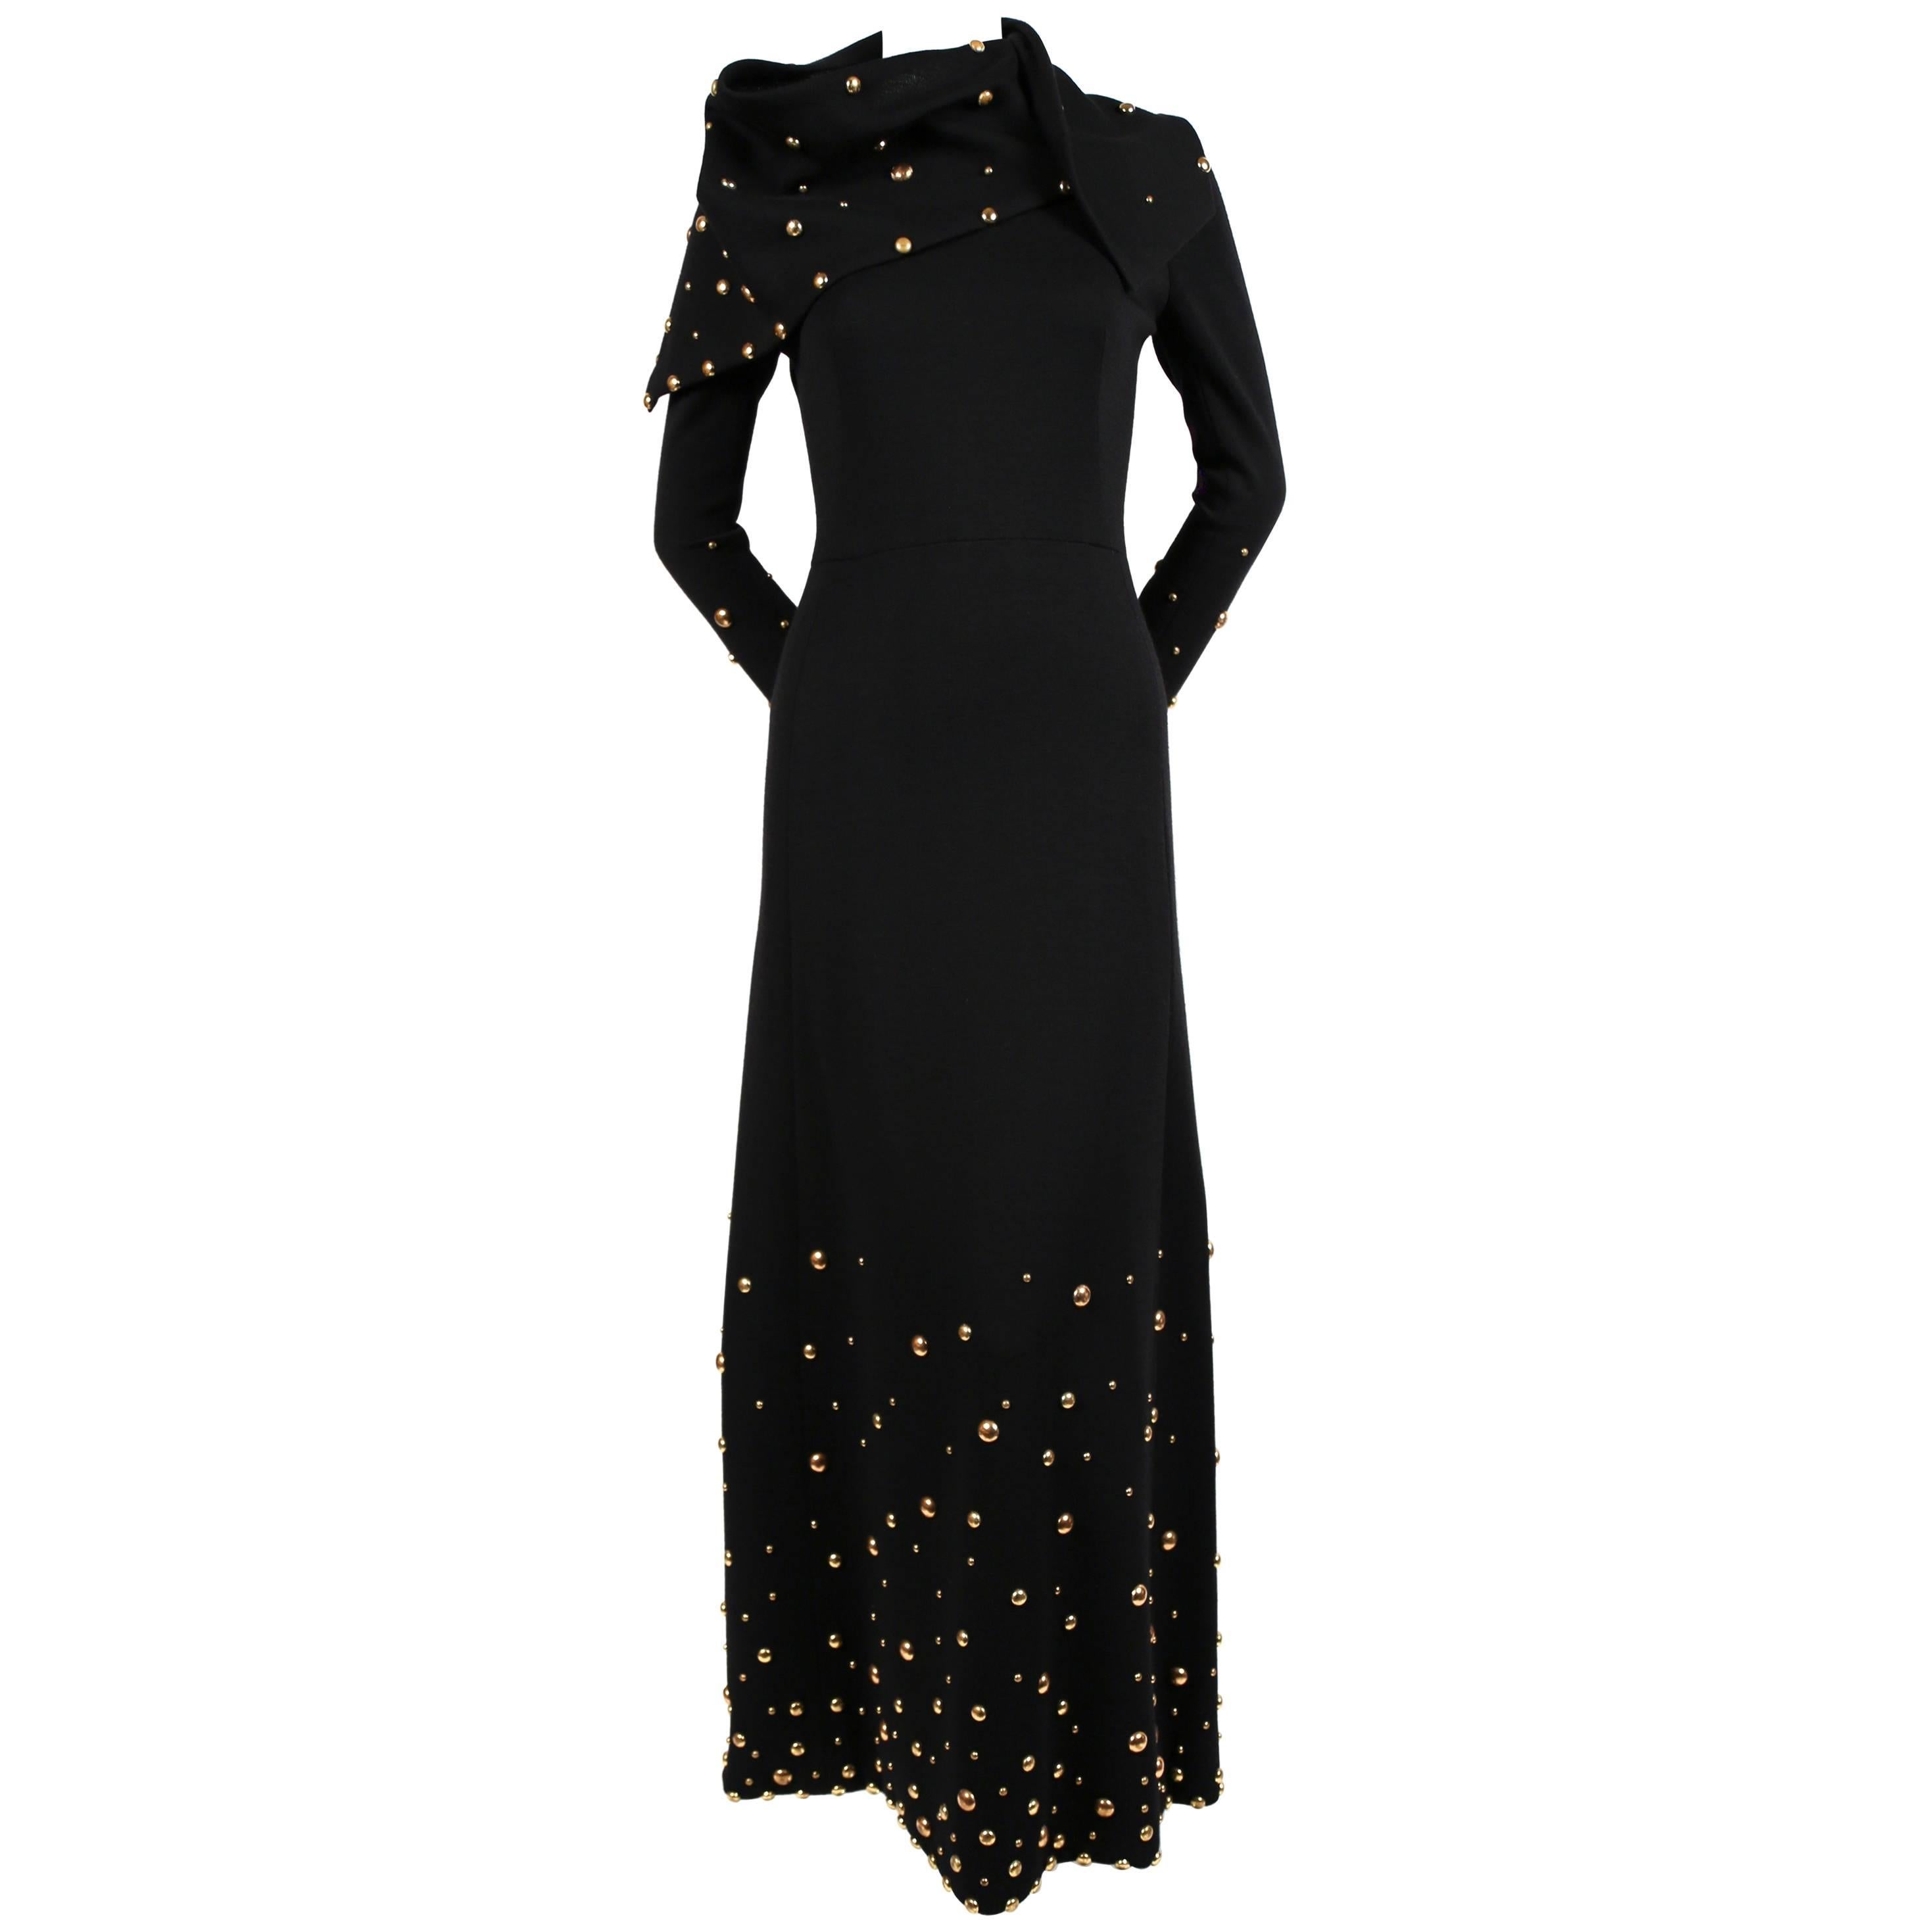 1970's GIVENCHY black wool dress with large gold studs